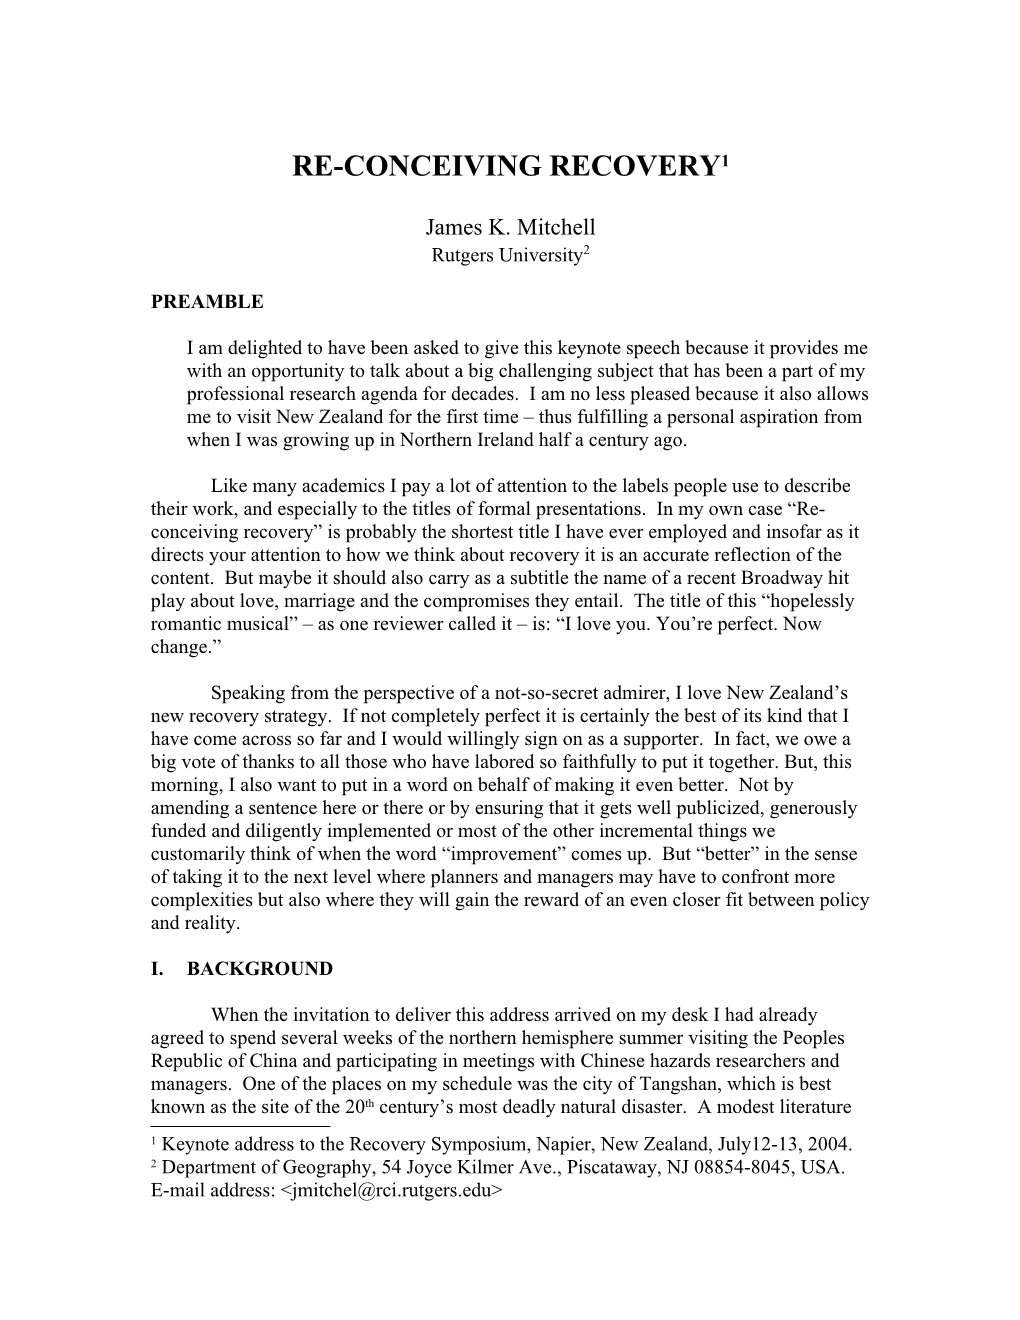 Re-Conceiving Recovery